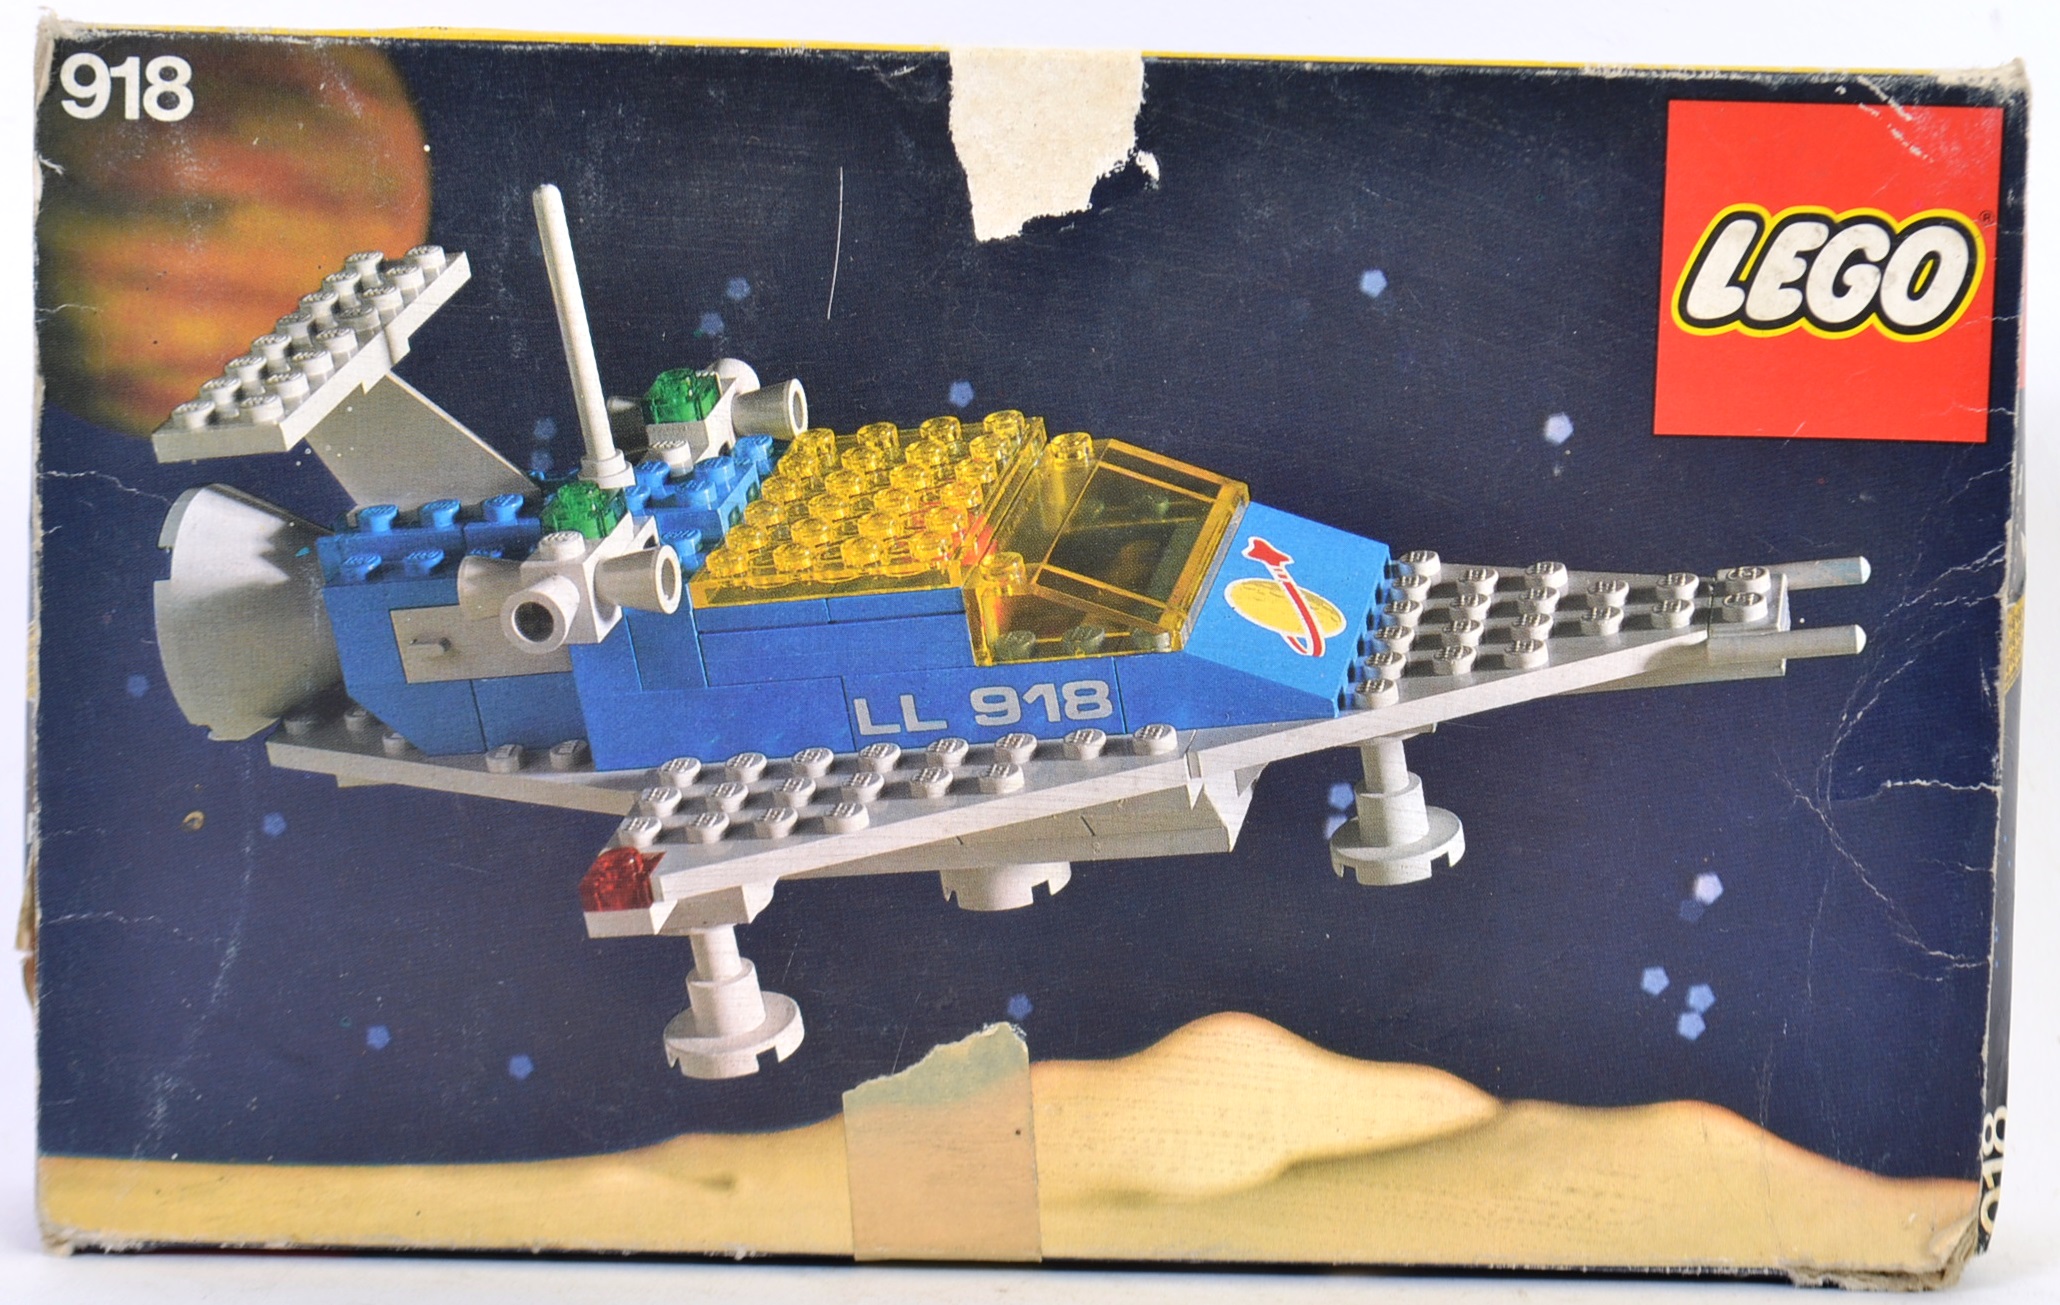 LEGO SPACE; An original 1980's Lego Land SPACE boxed set 918 One Man Spaceship.